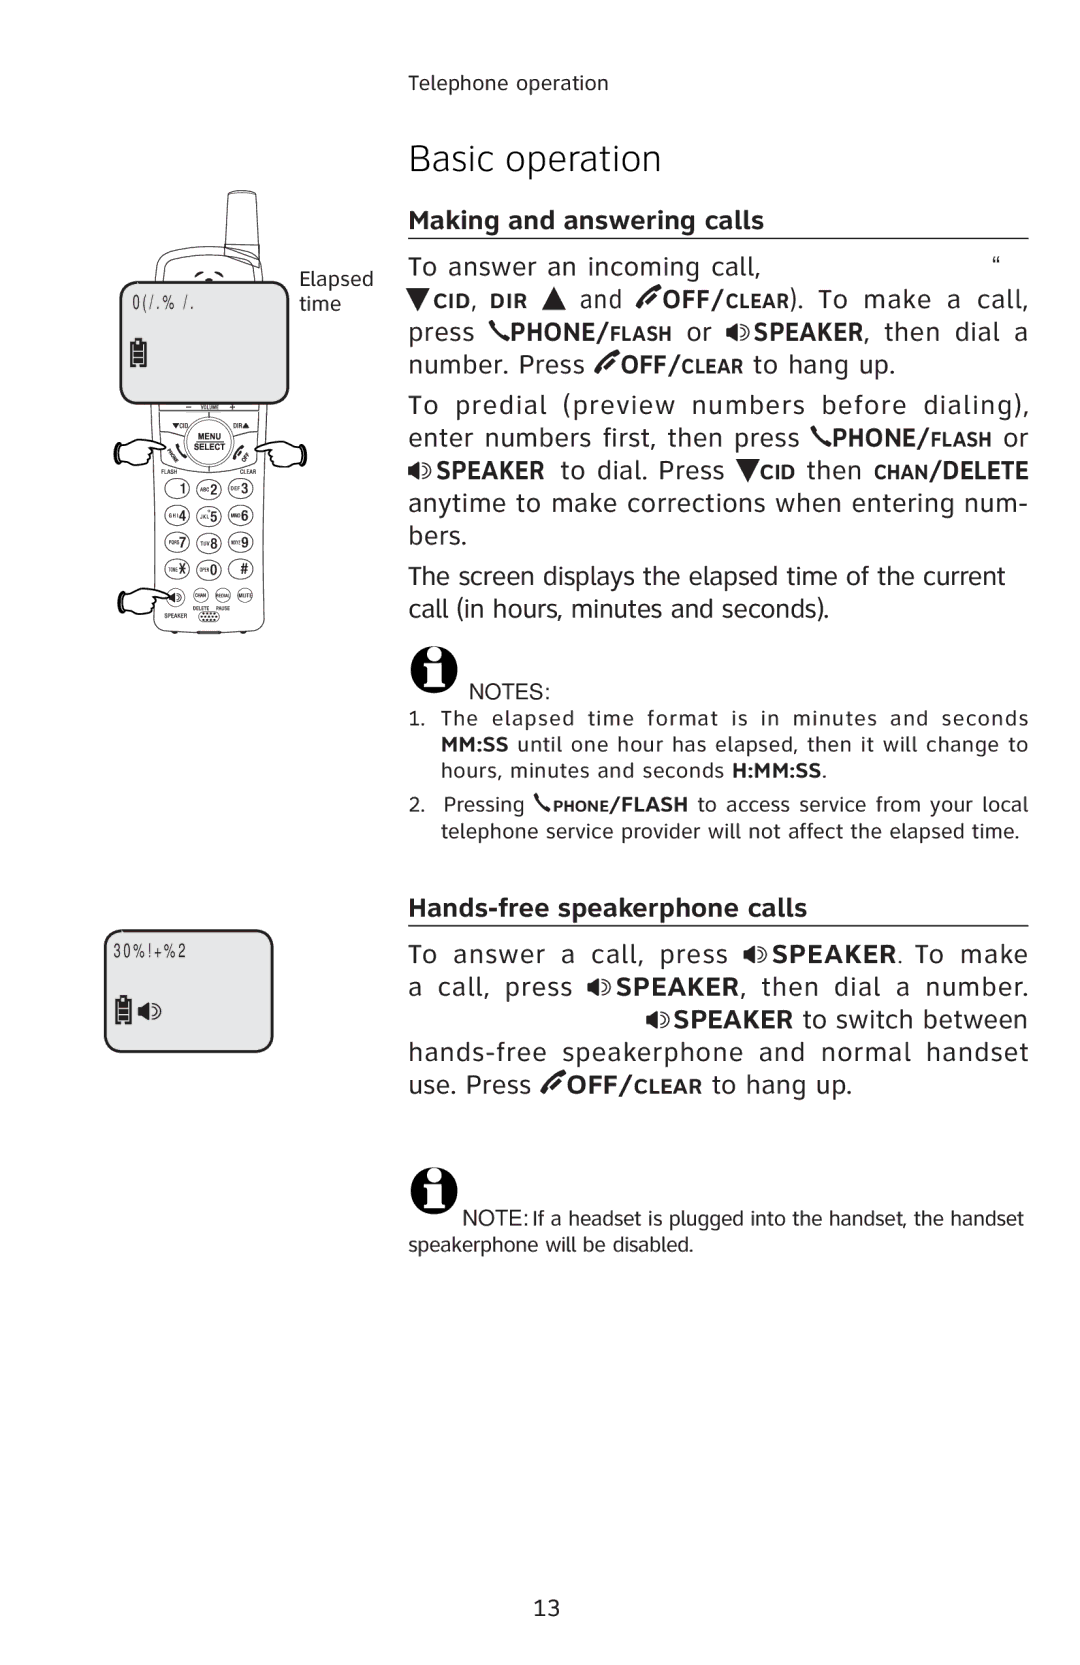 AT&T E5811 user manual Basic operation, Making and answering calls, Hands-free speakerphone calls 